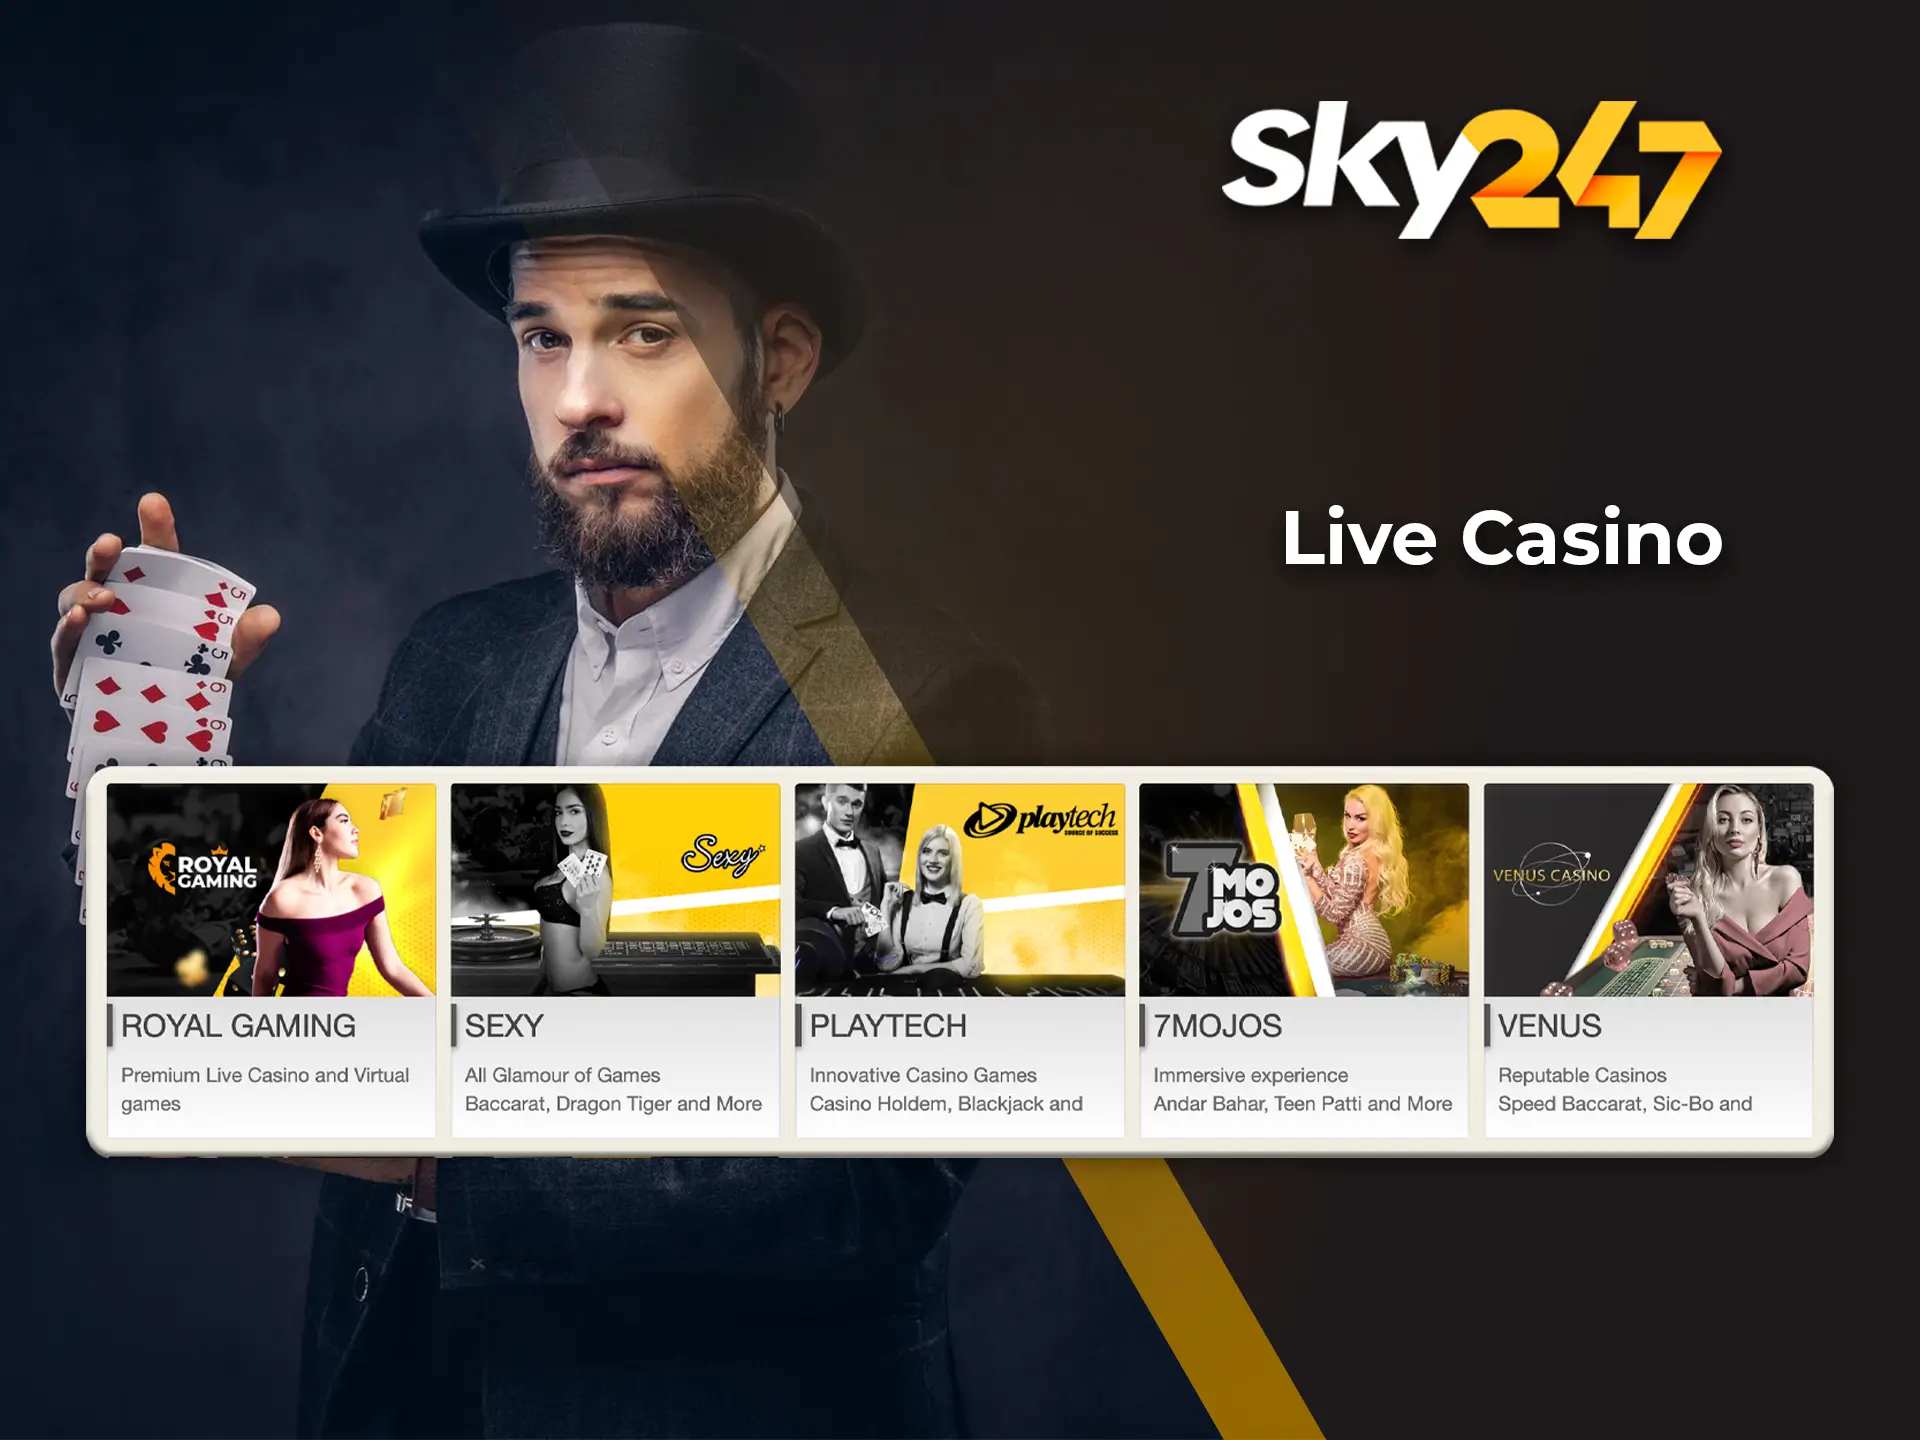 Show off your high-level skills when you play with the dealers at Sky247 Casino.